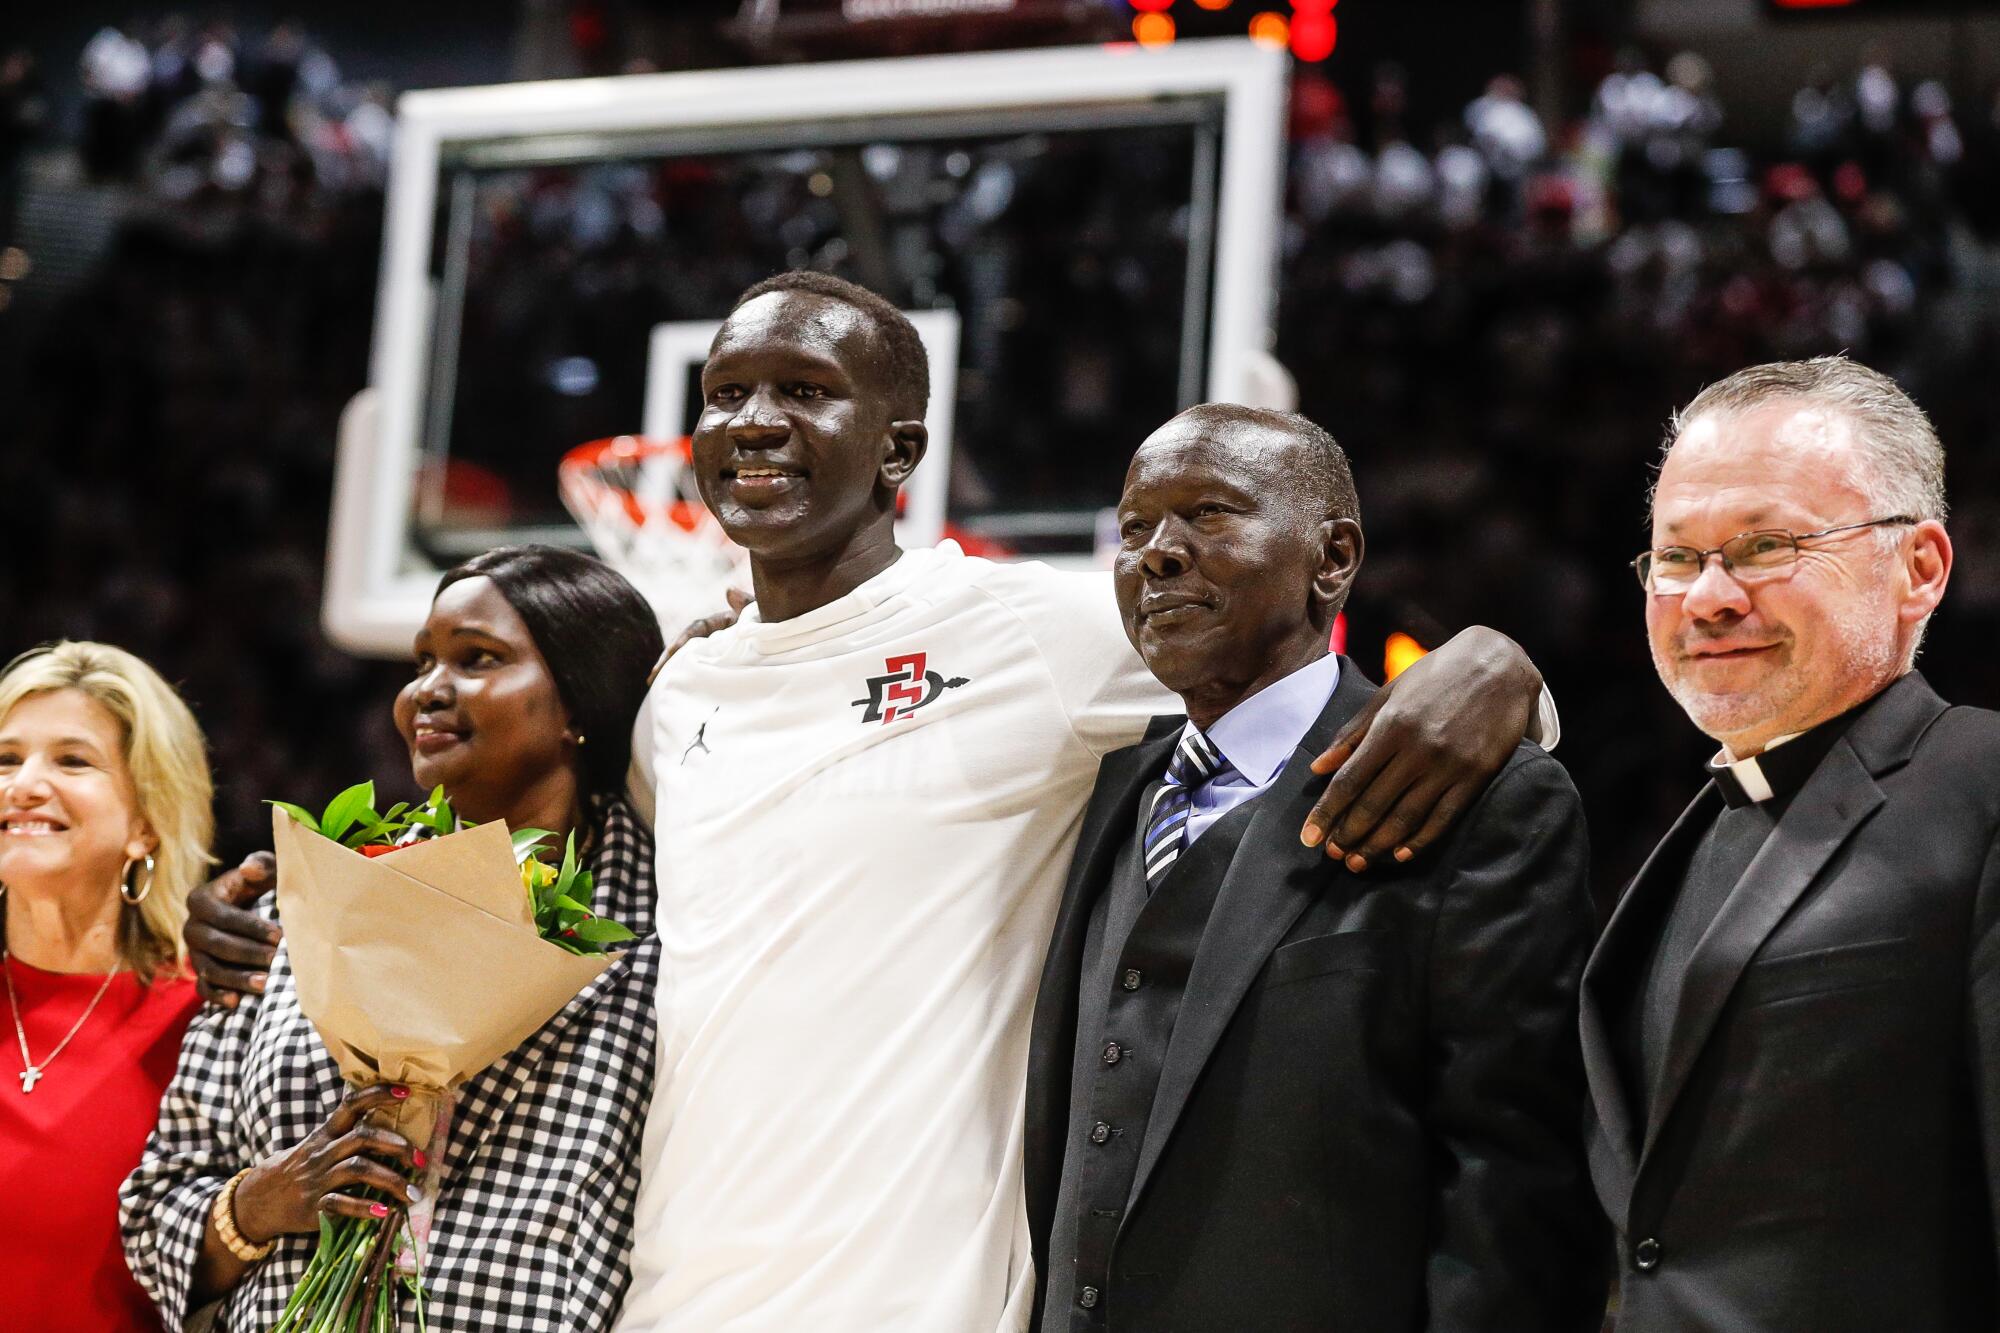 San Diego State forward Aguek Arop poses for a photo with family 